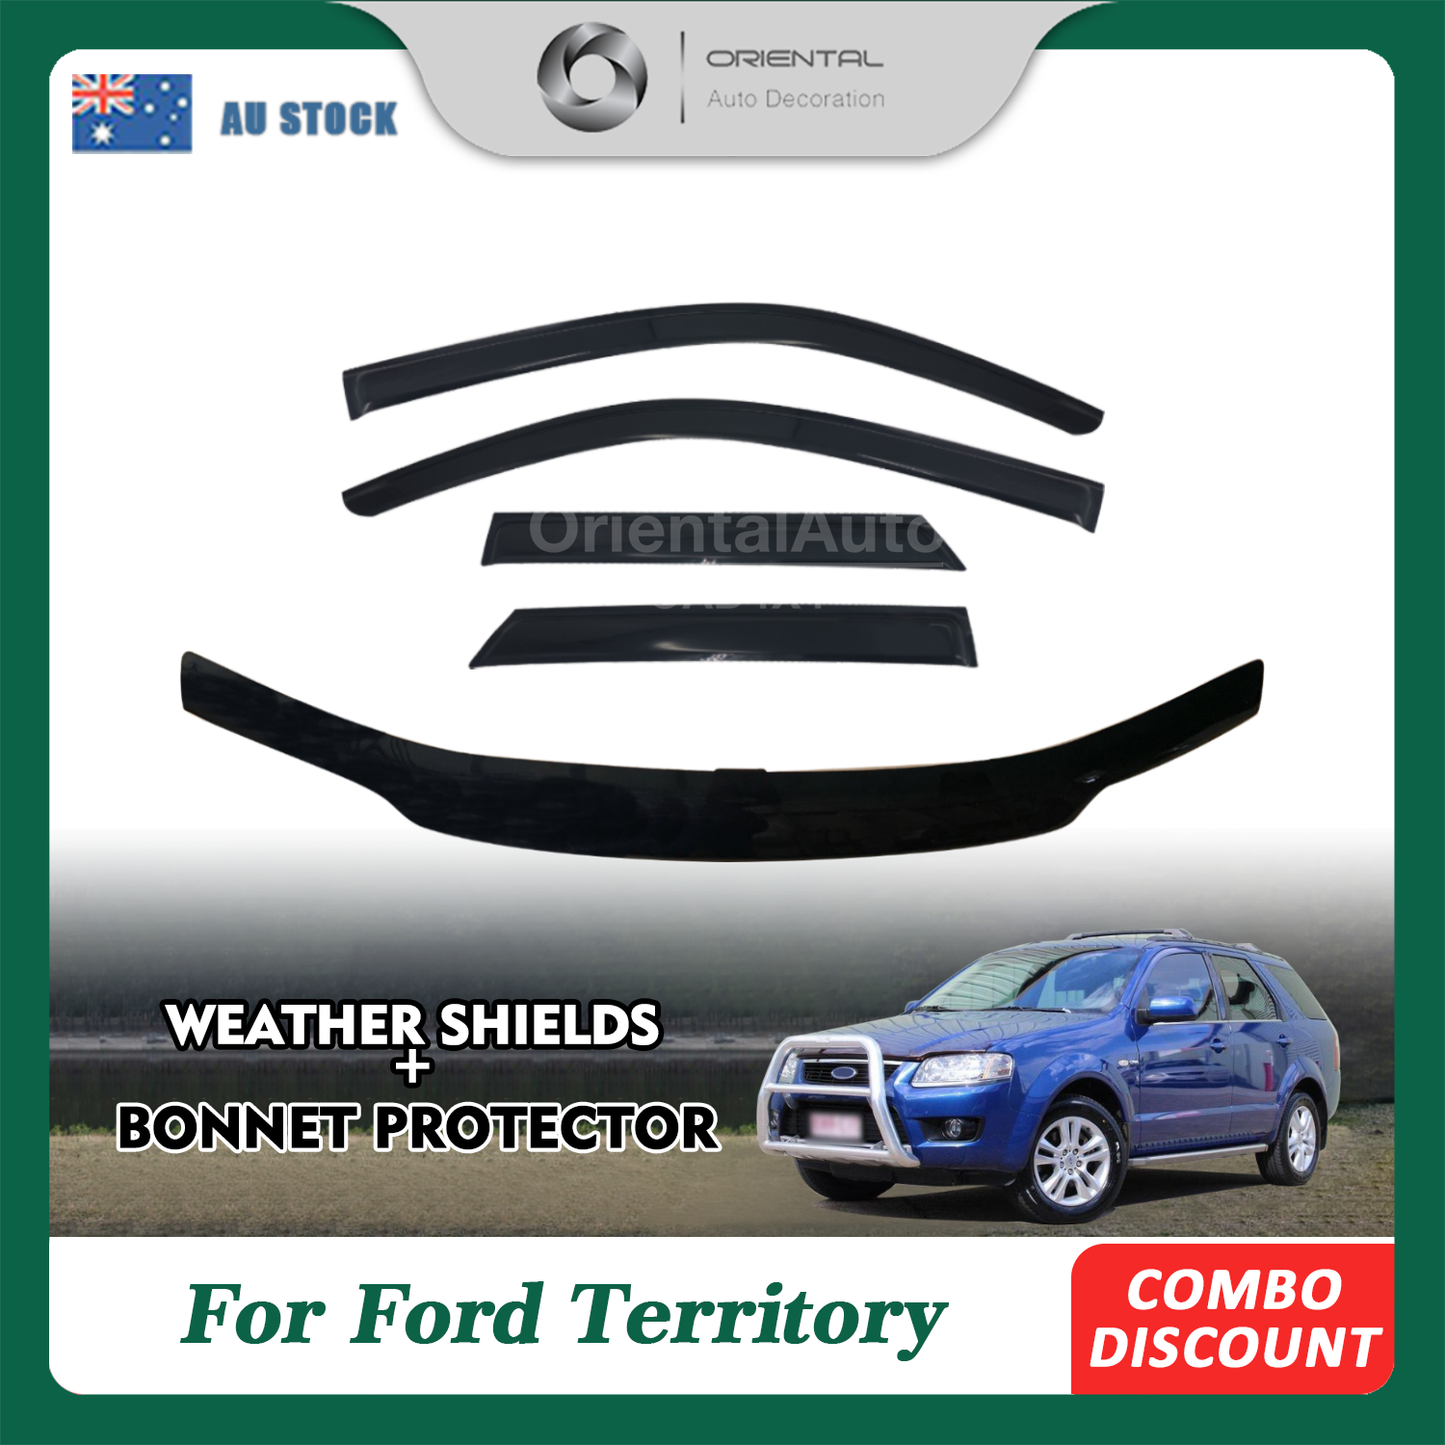 Bonnet Protector & Luxury Weathershields Weather Shields Window Visor For Ford Territory 2004-2011